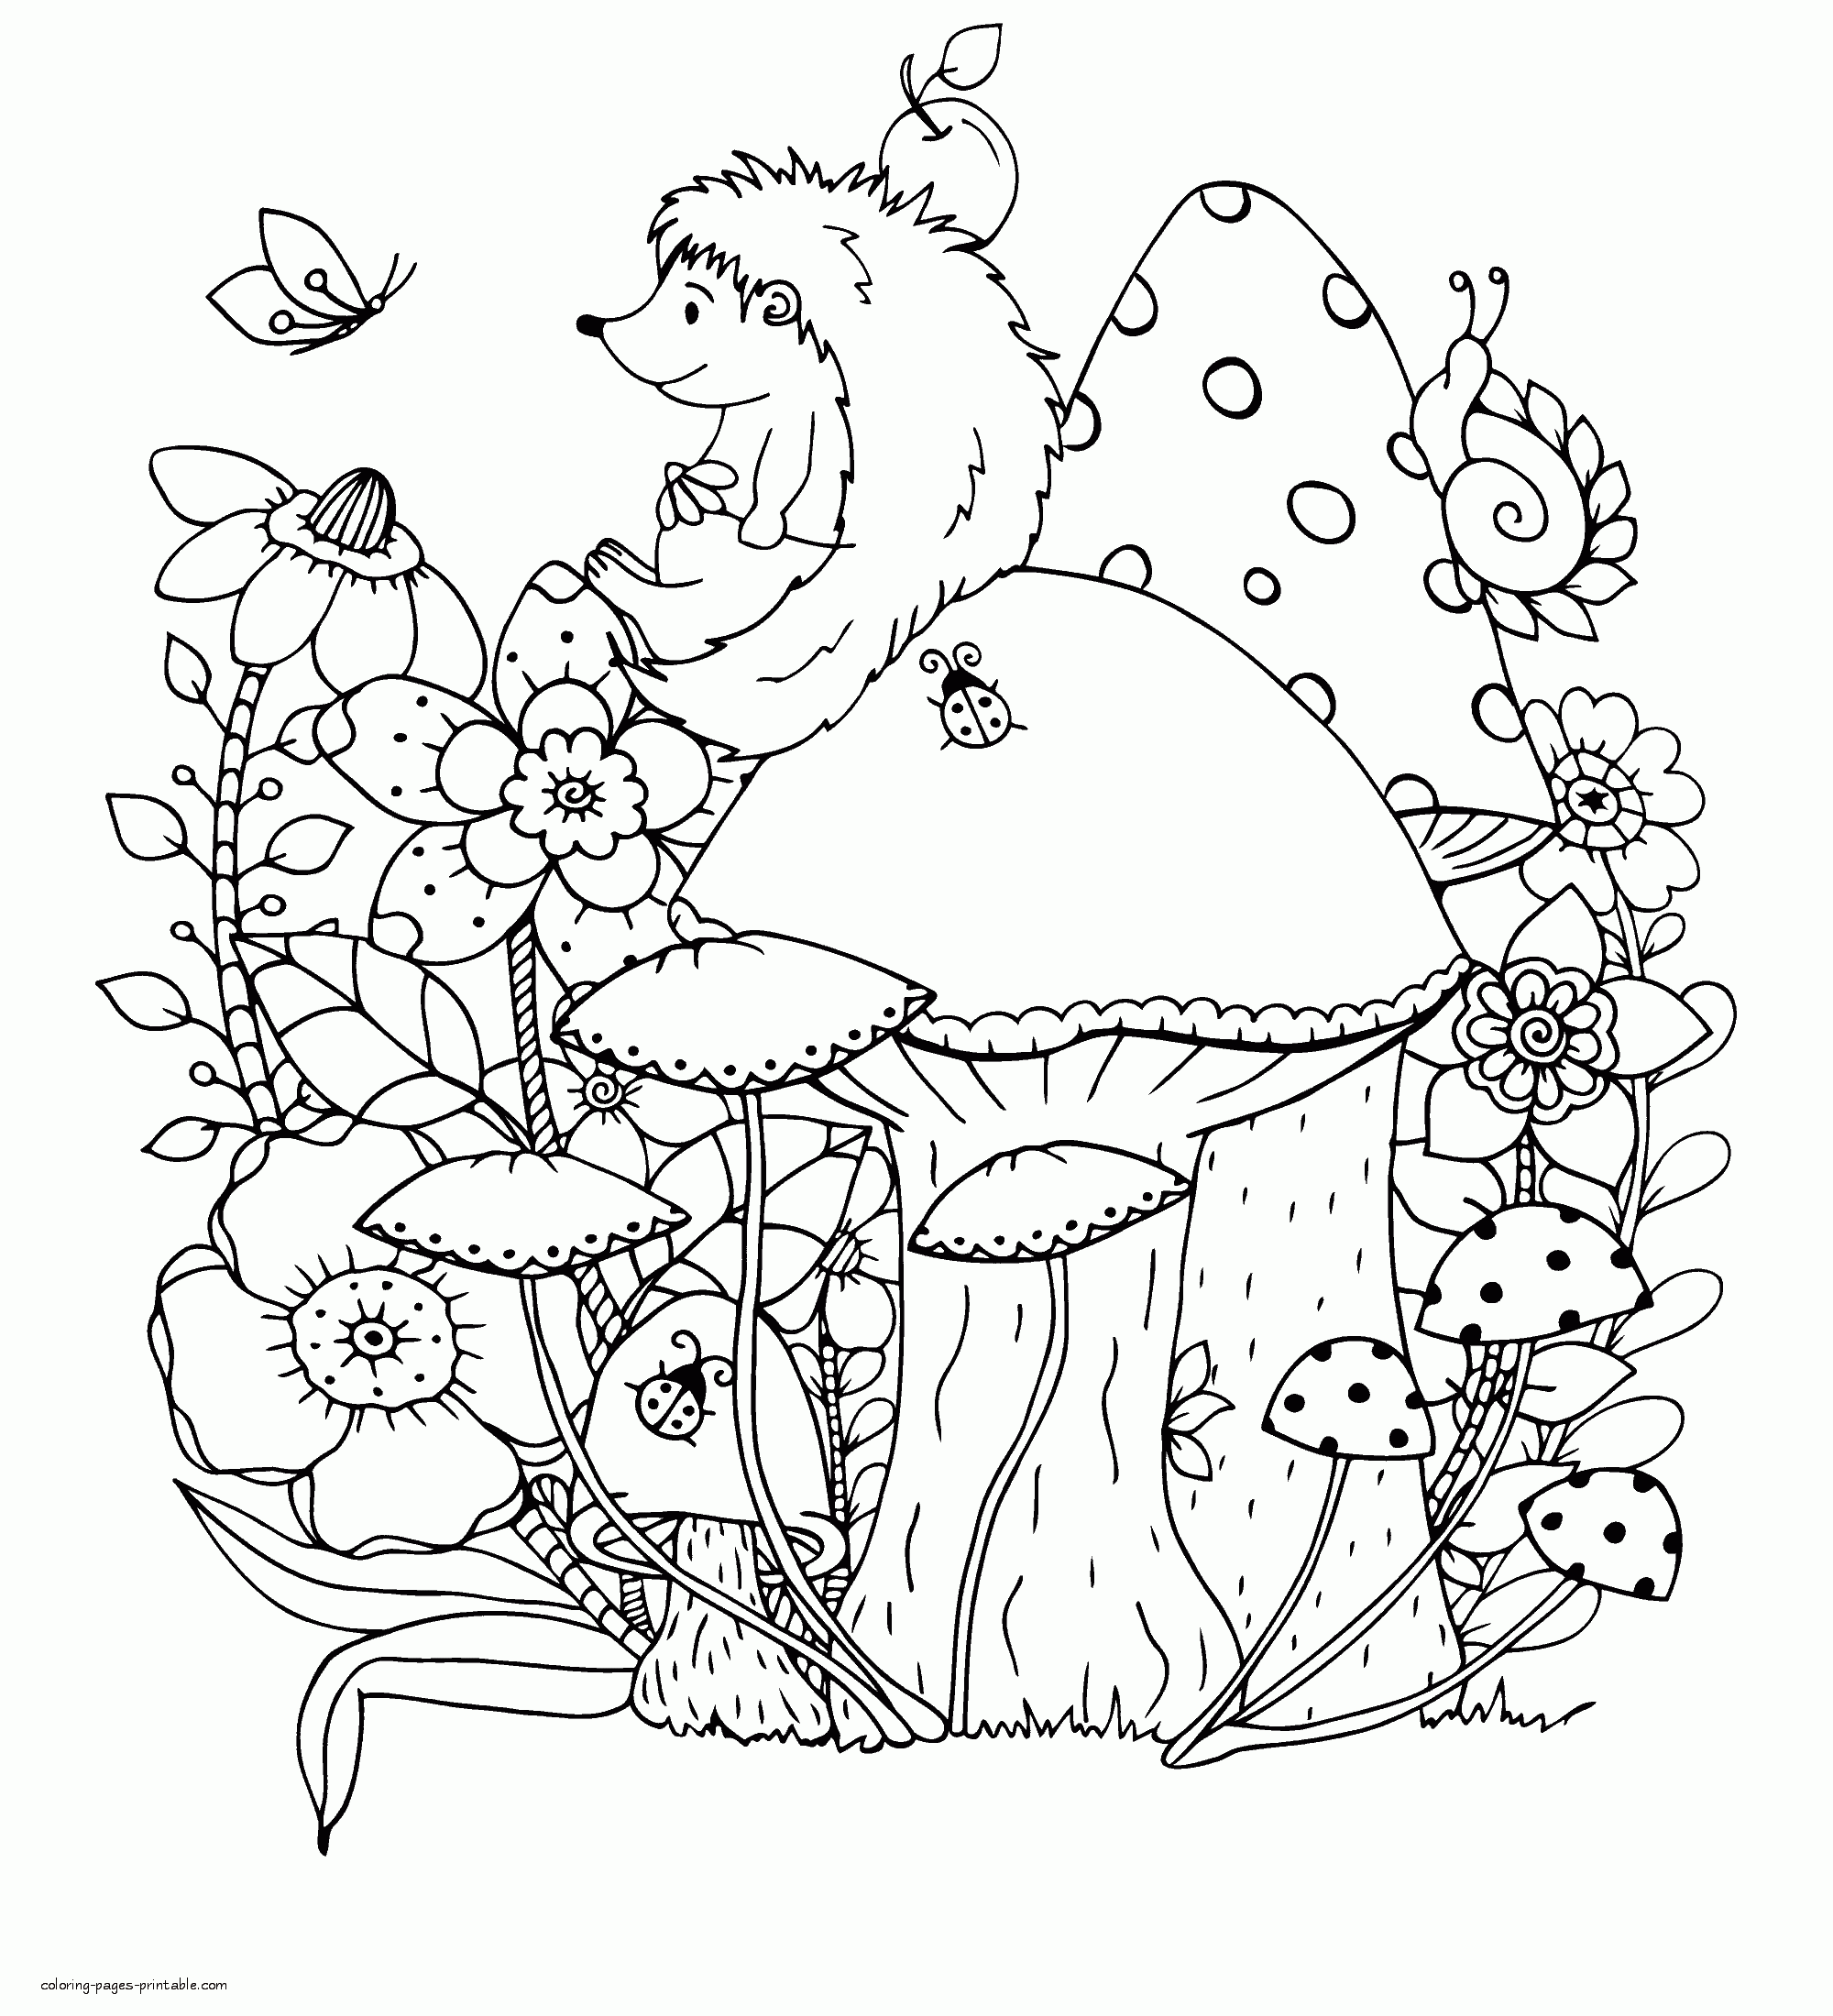 Hedgehog On A Mushroom Coloring Sheet || COLORING-PAGES-PRINTABLE.COM